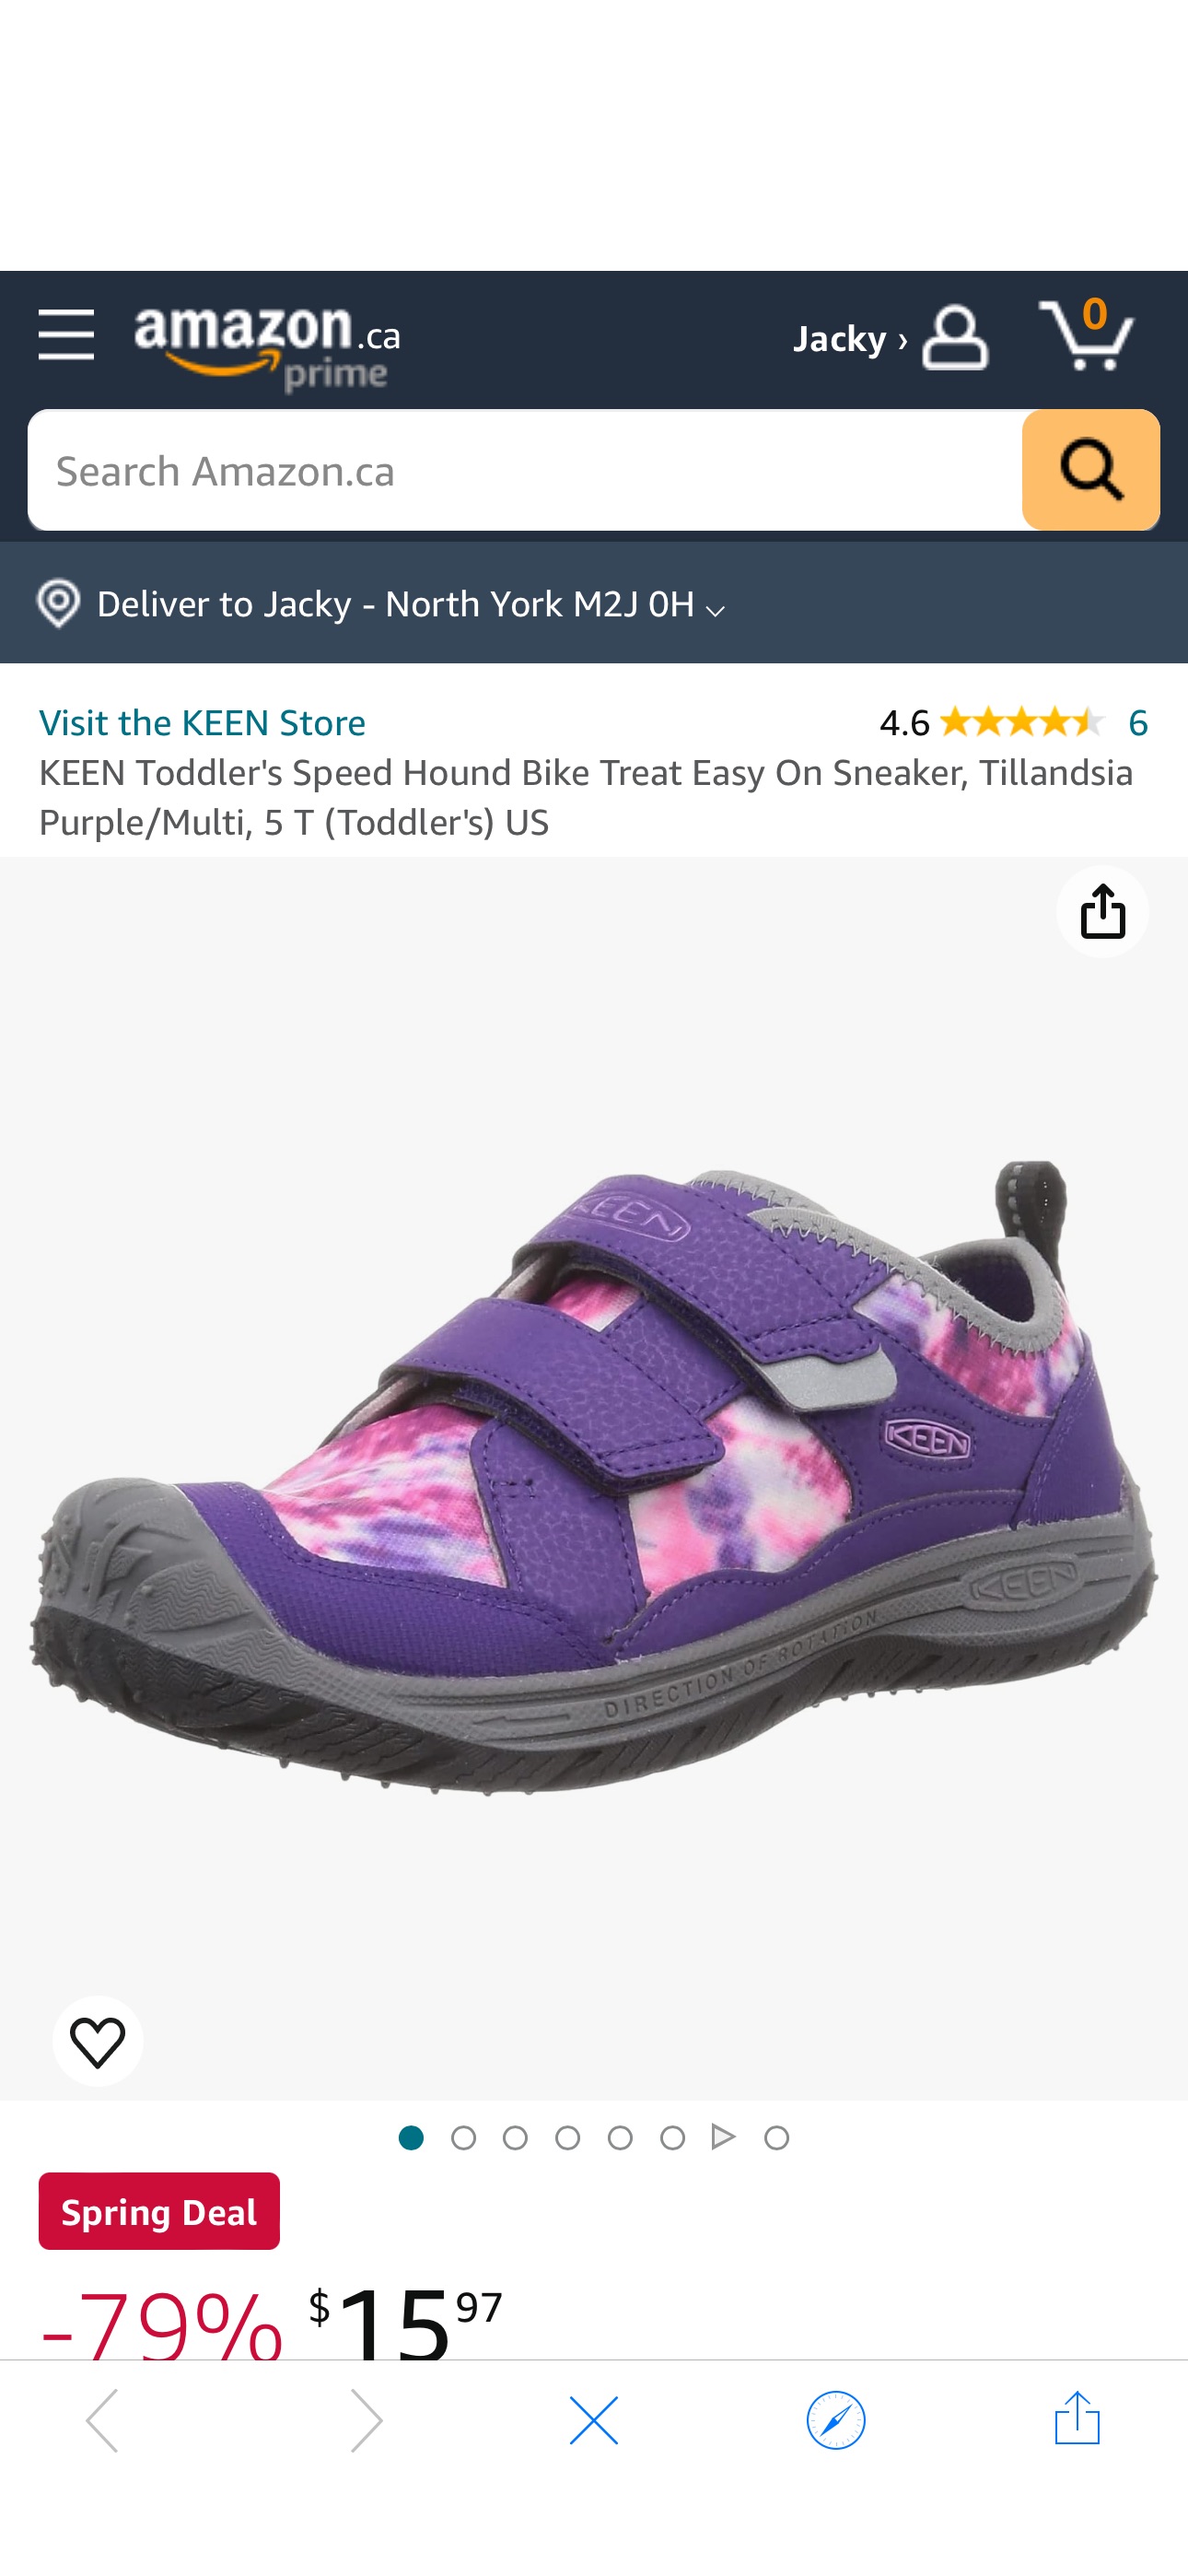 KEEN Toddler's Speed Hound Bike Treat Easy On Sneaker, Tillandsia Purple/Multi, 5 T (Toddler's) US : Amazon.ca: Clothing, Shoes & Accessories